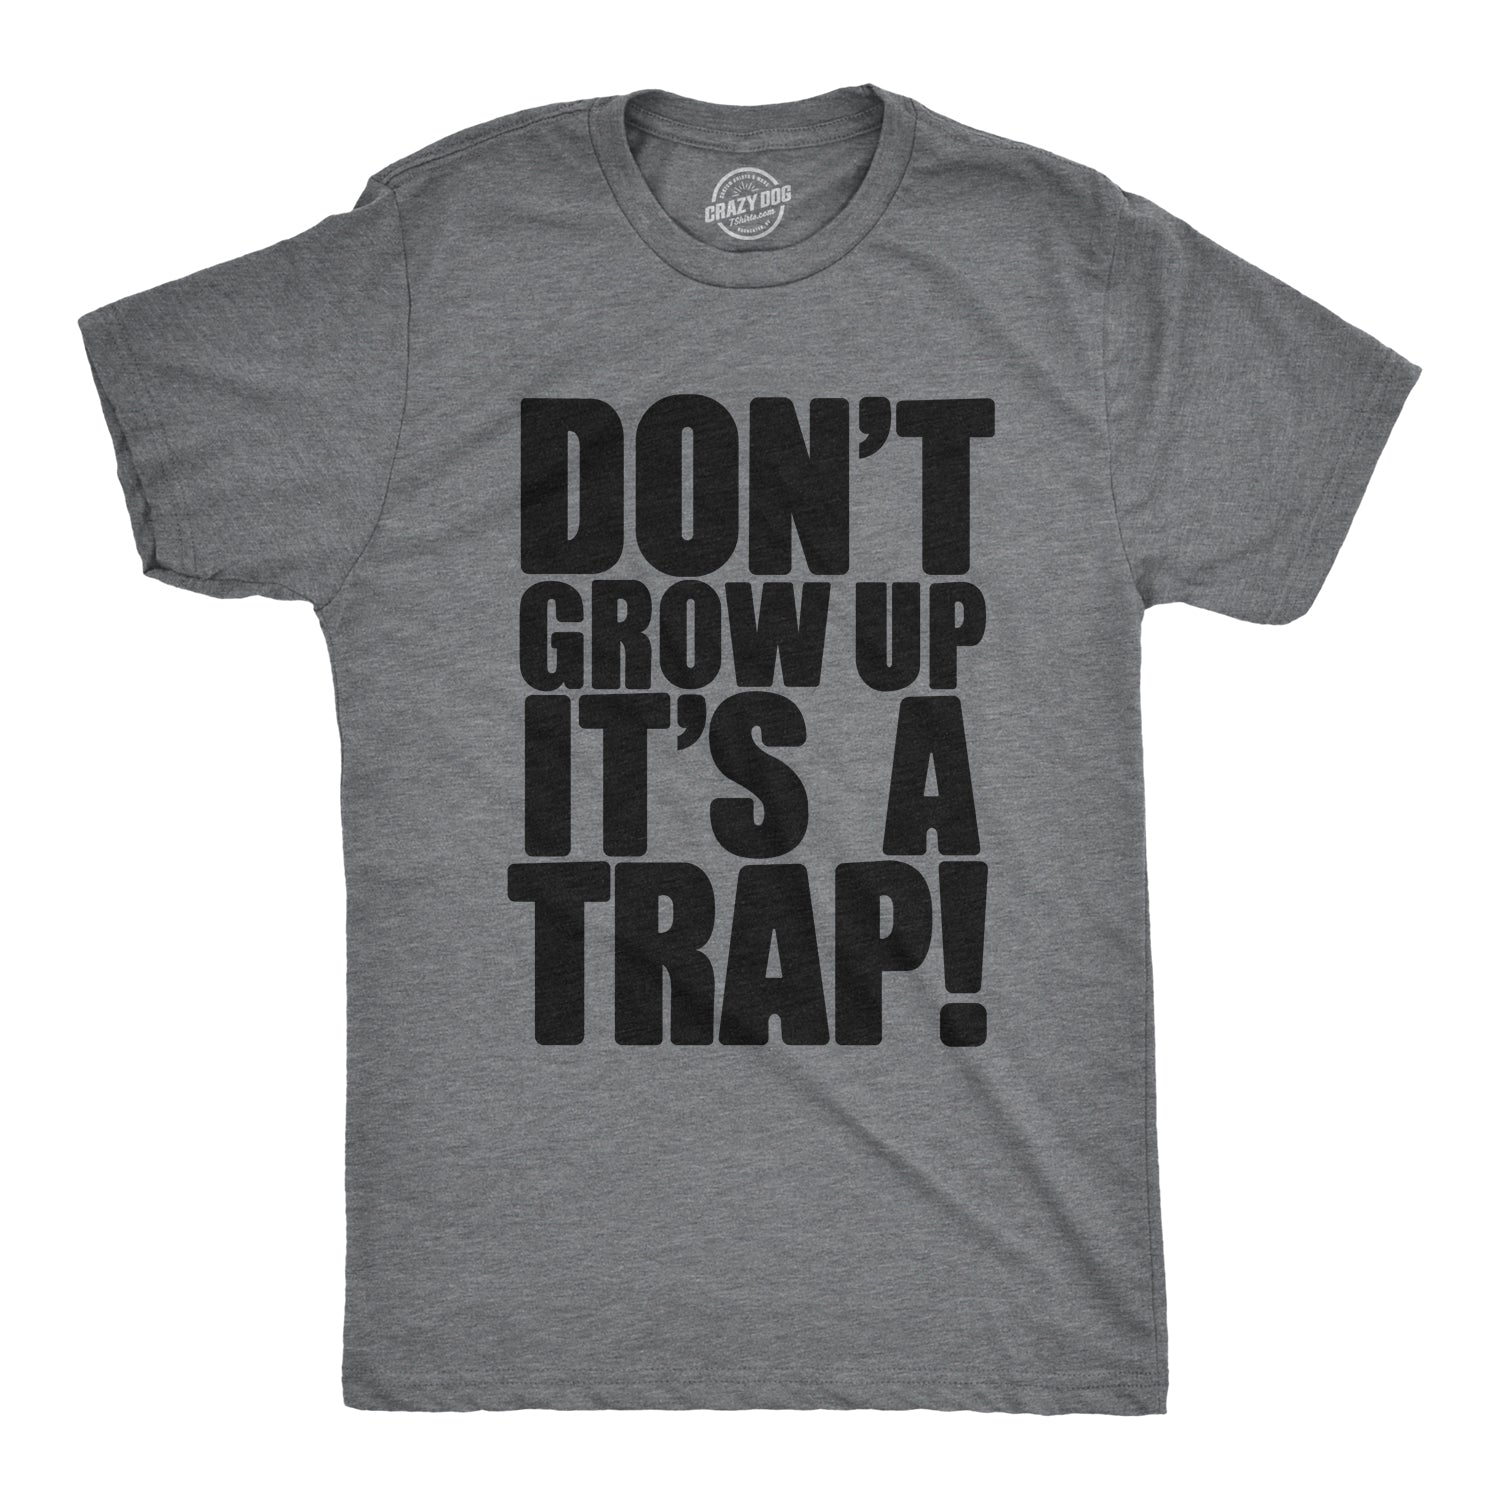 Funny Dark Heather Grey - Its a Trap Don't Grow Up. It's a Trap Mens T Shirt Nerdy Sarcastic Tee